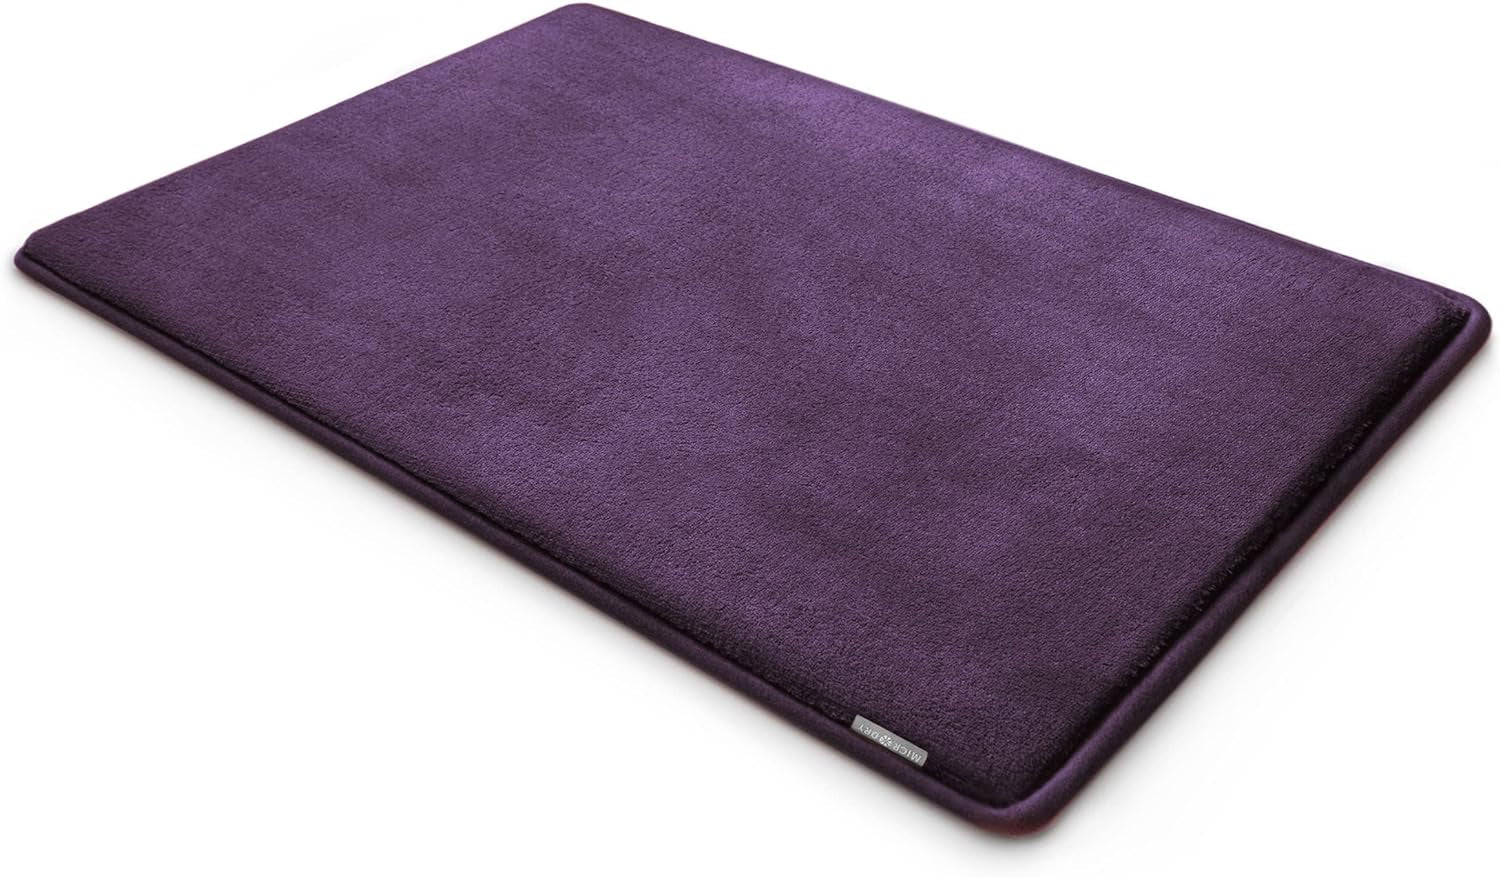 - Luxurious Memory Foam Bath Mat, Absorbent Bathroom Mat with Skid-Resistant Base, Machine-Washable Bath Mats for Bathroom, Kitchens & More, Quick Dry Mat 17 X 24 Inches, Iris